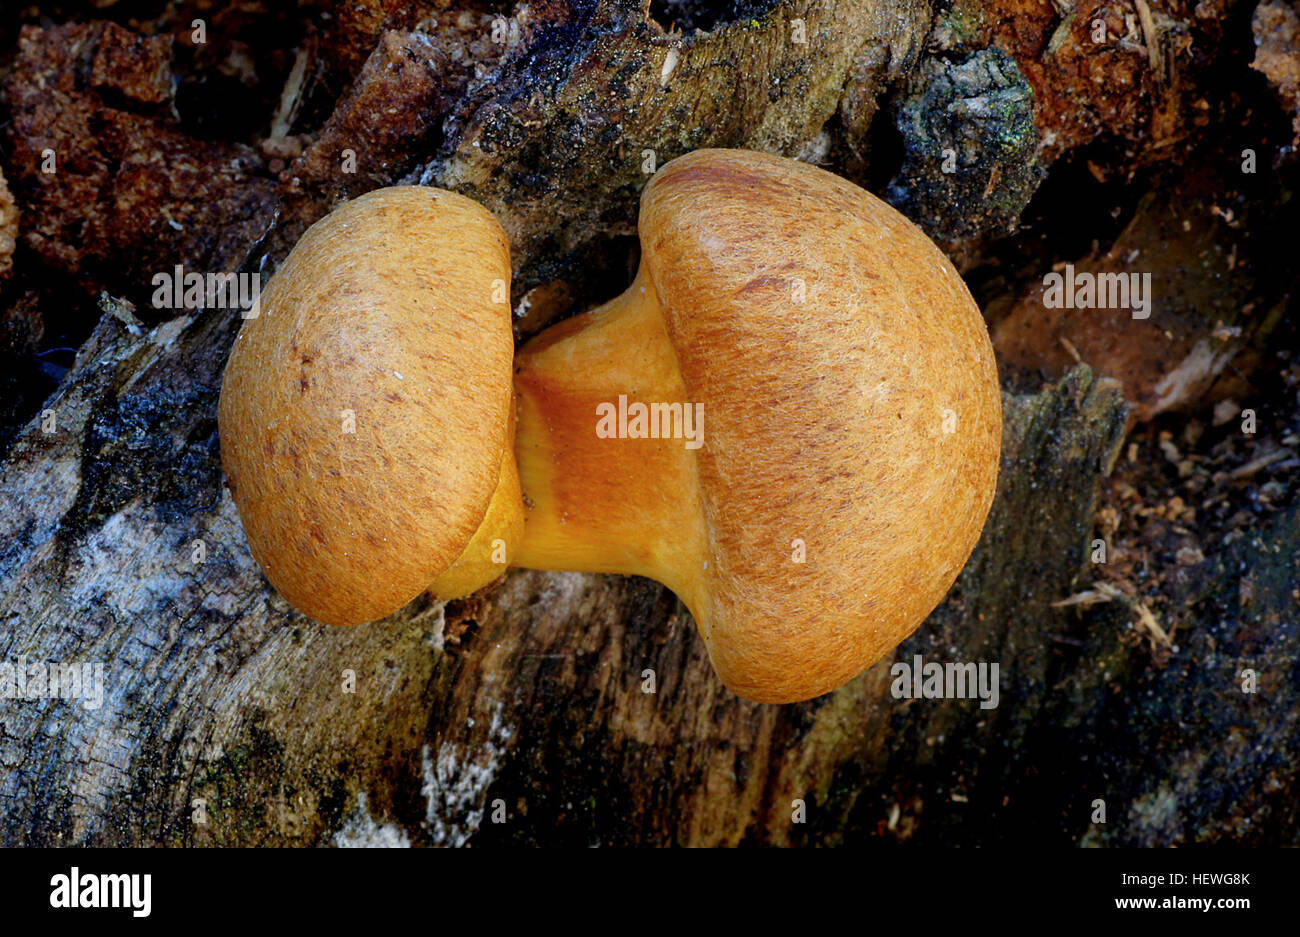 Gymnopilus is a genus of gilled mushrooms within the fungal family Strophariaceae containing about 200 rusty-orange spored mushroom species formerly divided among Pholiota and the defunct genus Flammula. Stock Photo